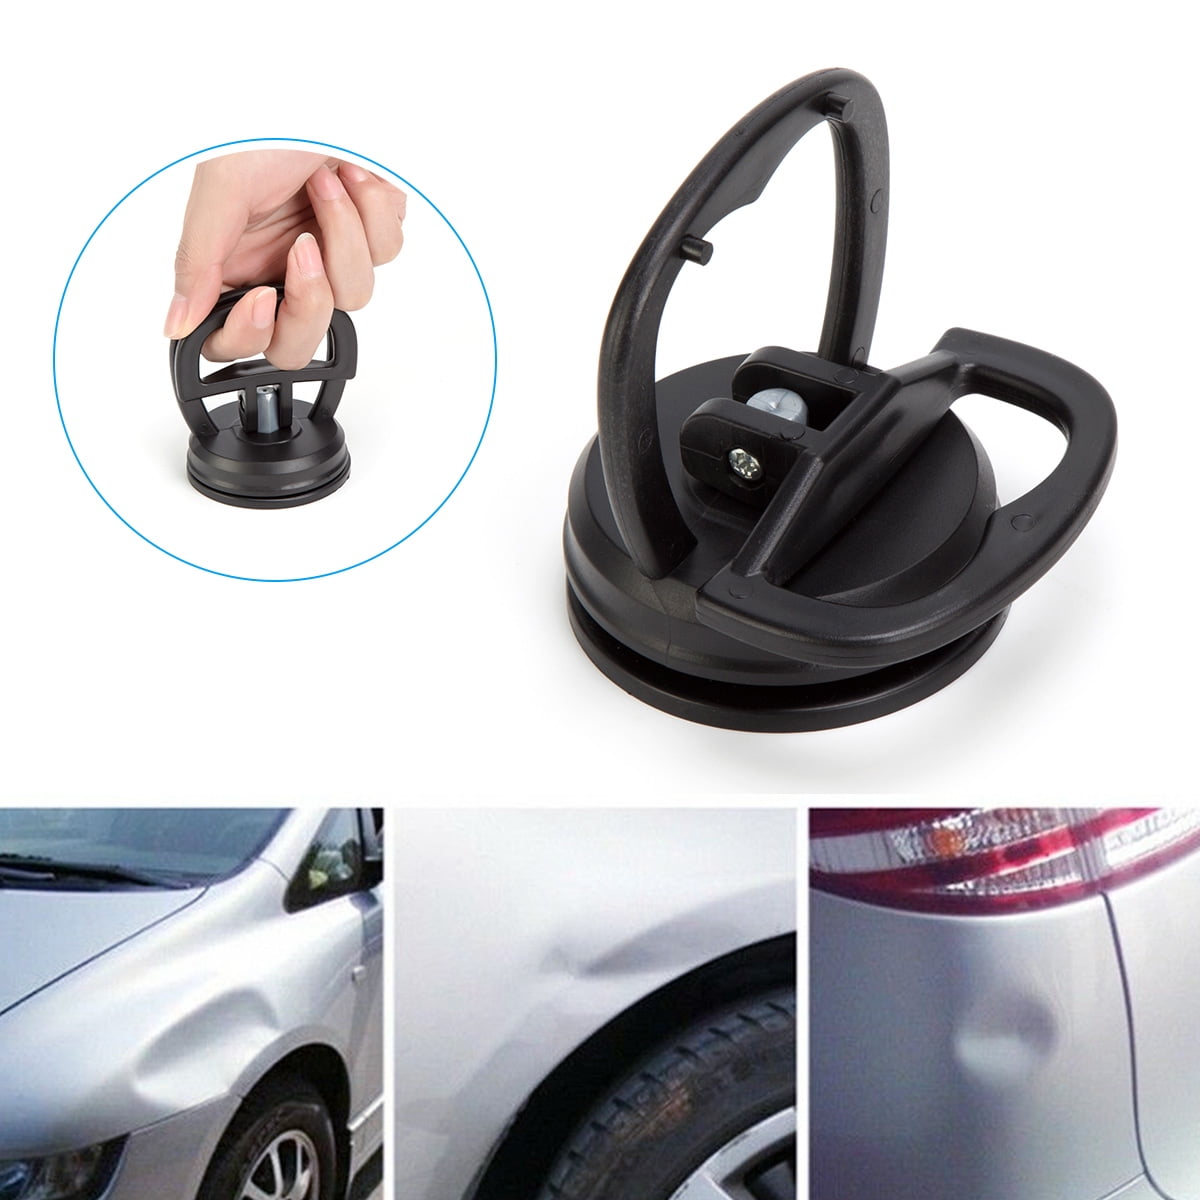 2.2" Car Body Dent Remover Repair Puller Sucker Panel Suction Cup Tools